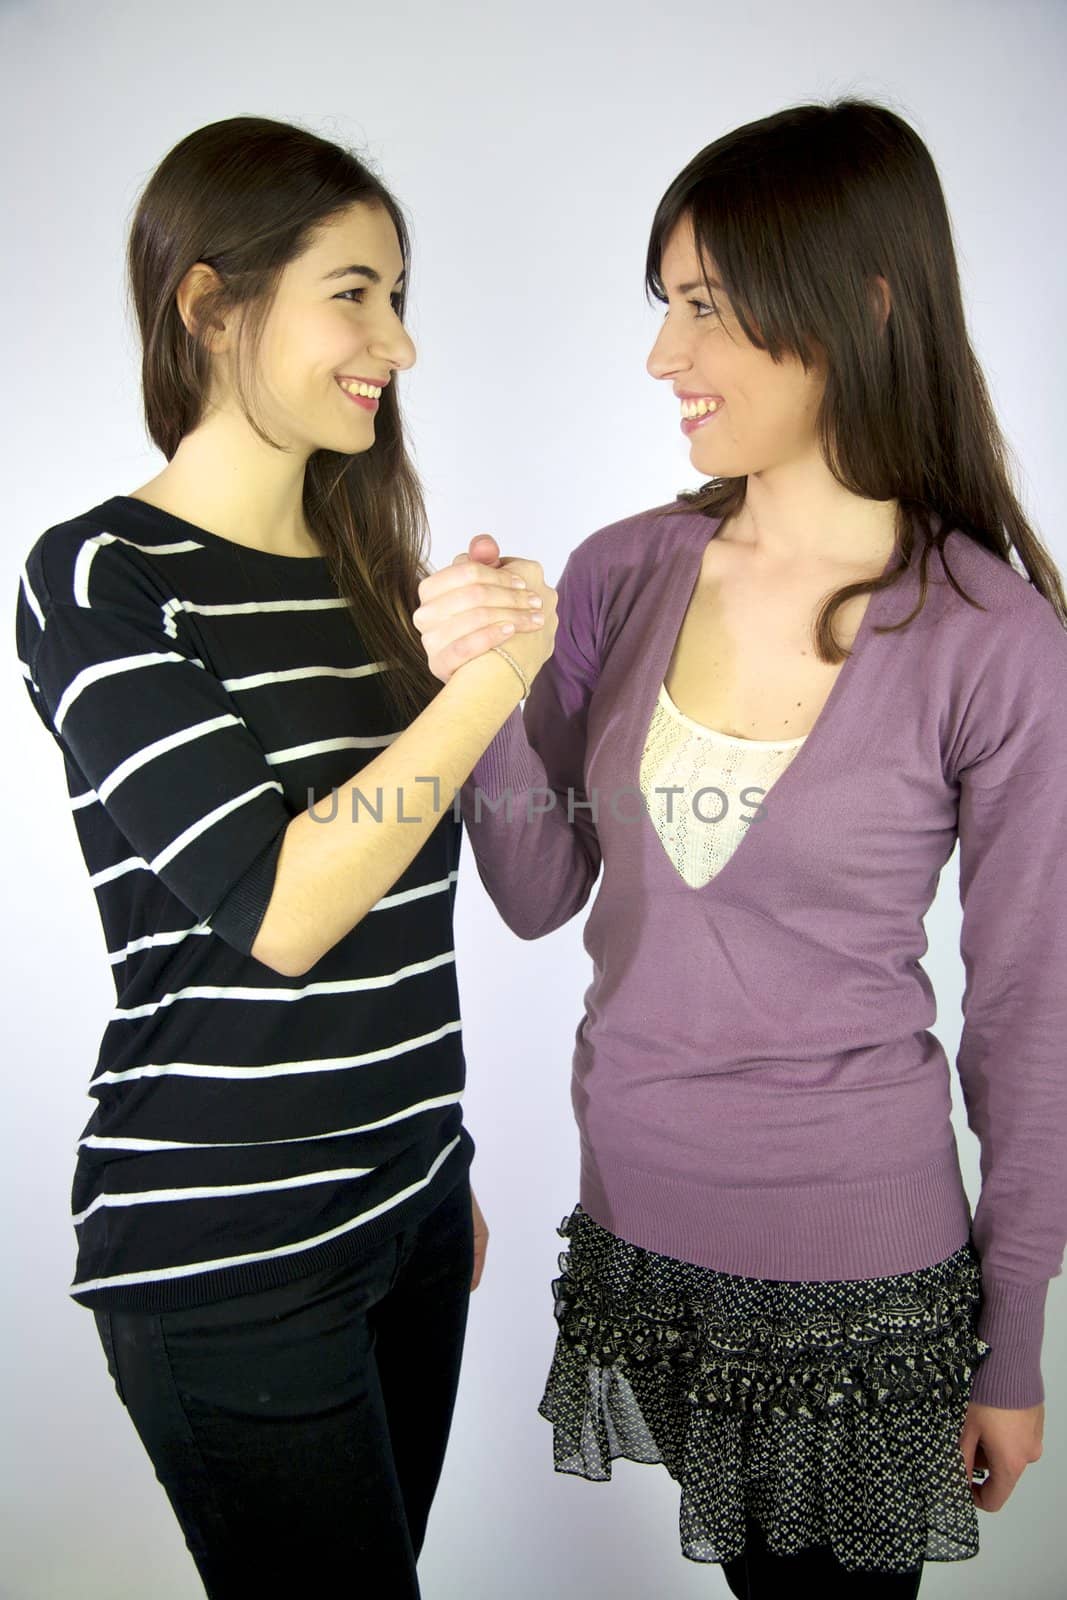 Female models holding hand sign of friendship happy